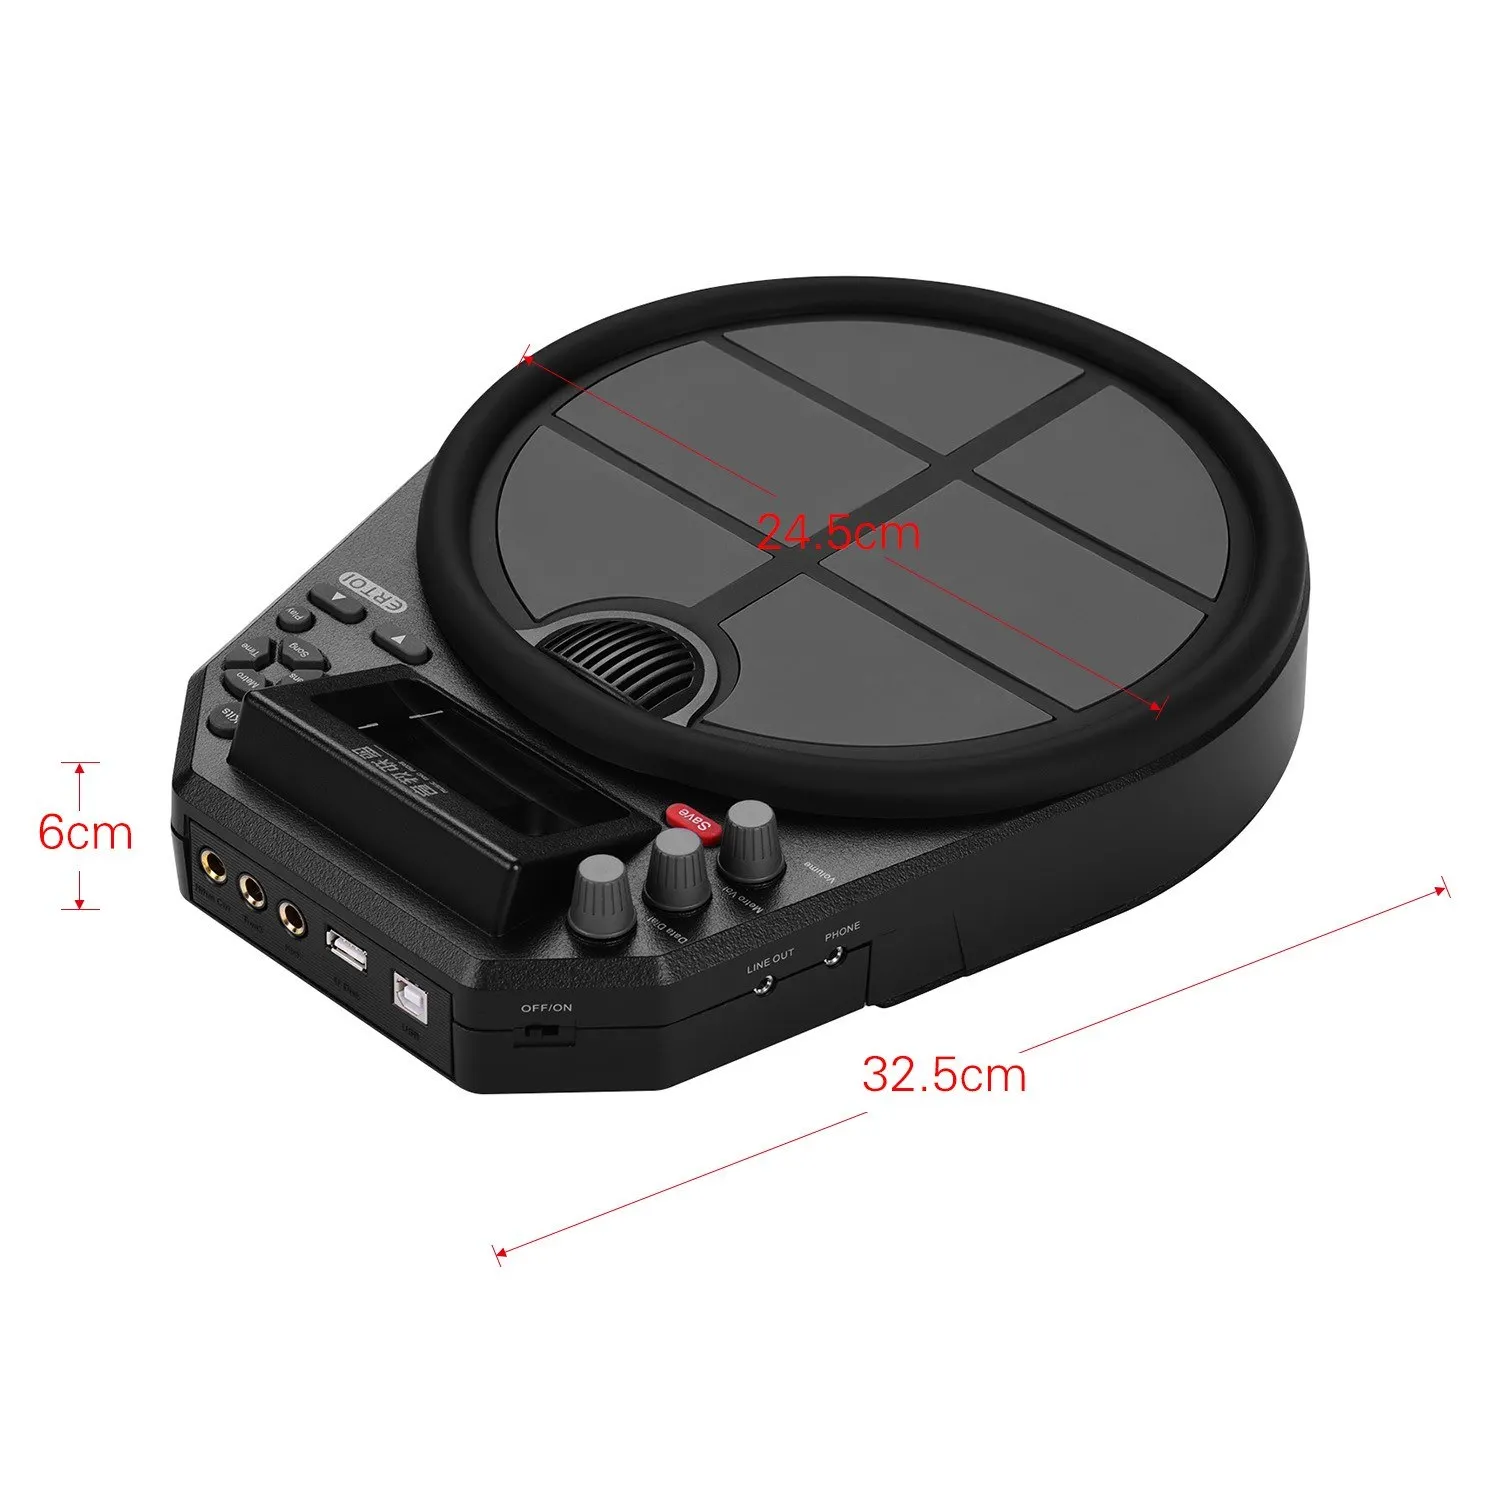 Irokimusic Flexible Great Holiday Birthday Gift for Kids Roll Up Drum Practice Pad with Headphone Jack without Speaker Drum Pedals 12 Hours Playtime Completely Portable Electronic Drum Set 